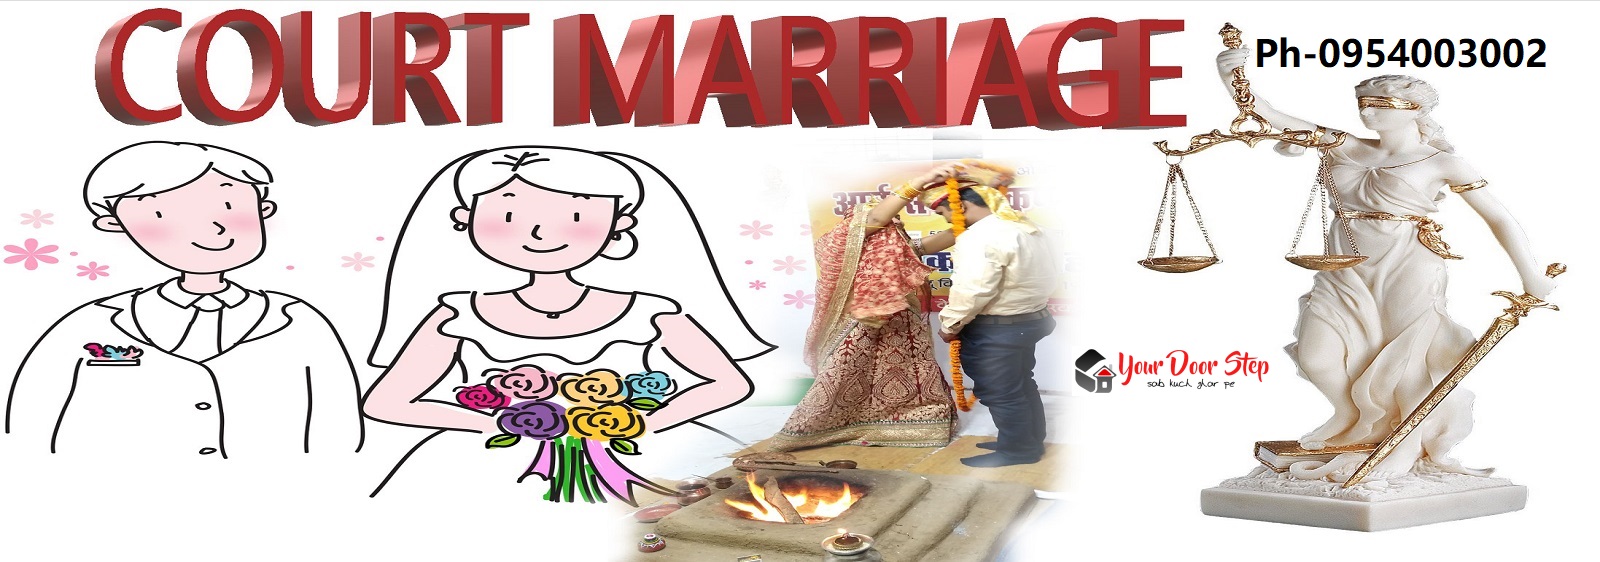 court marriage in bangalore